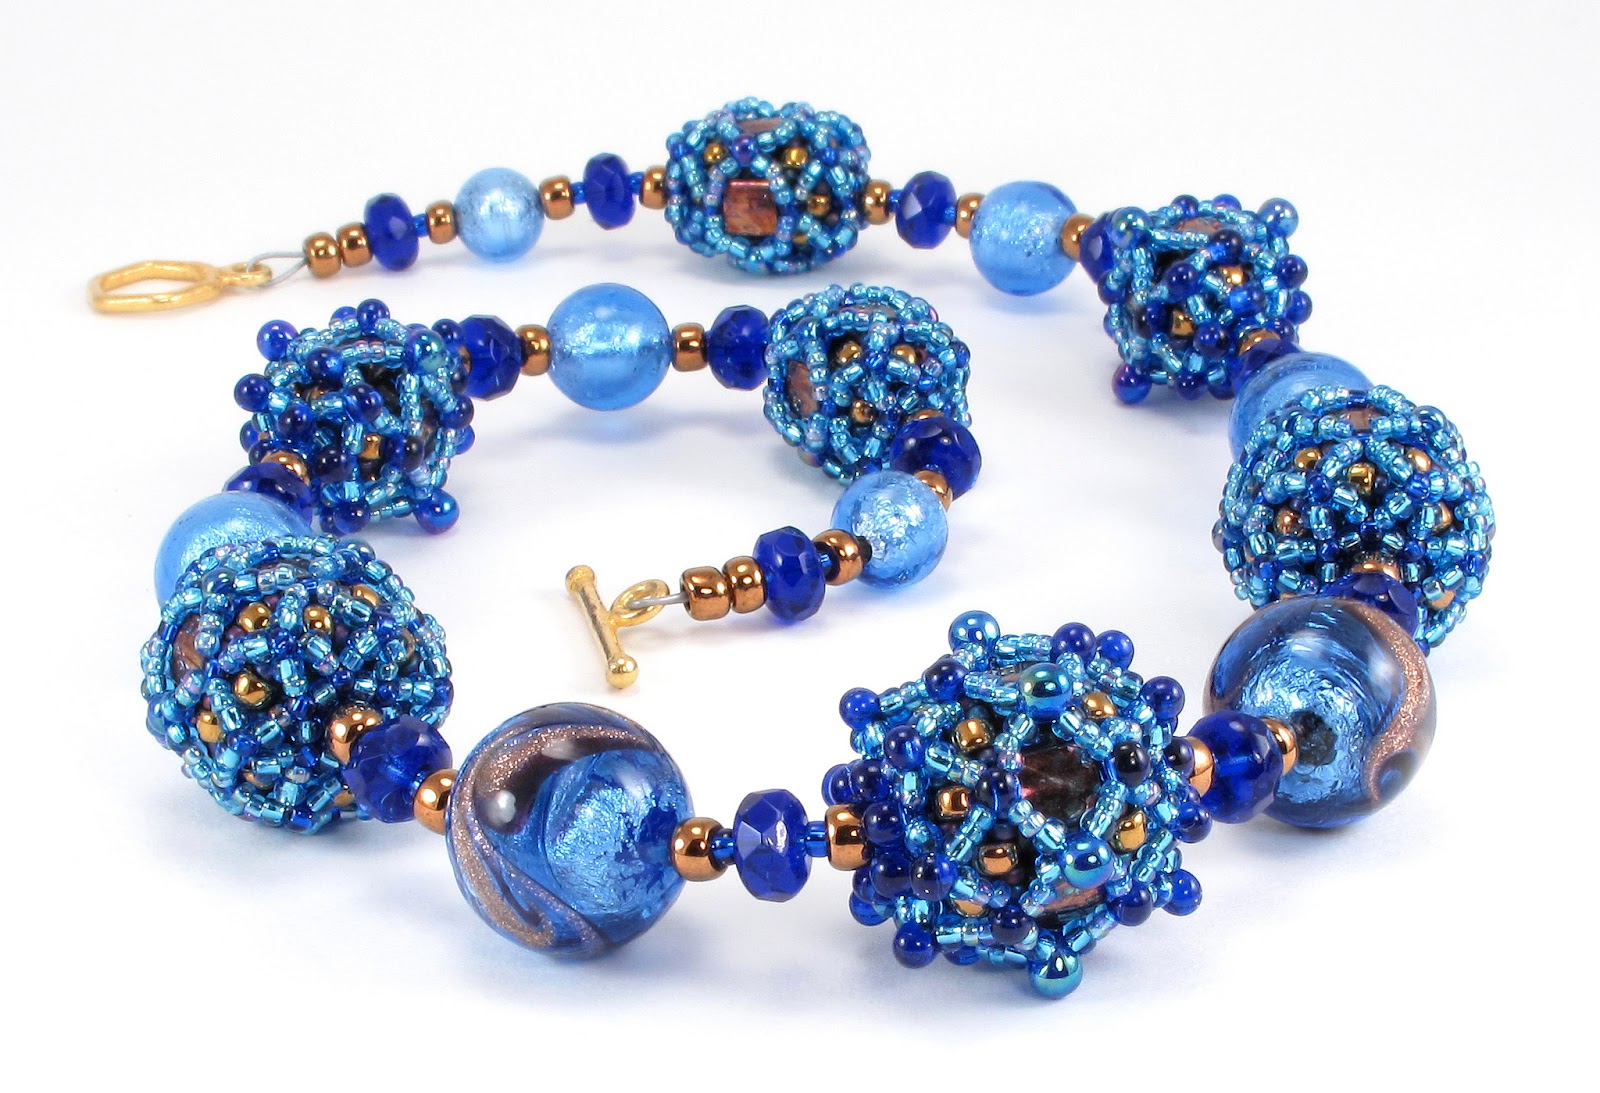 Bead Origami: Beaded Beads and Lampwork Beads, Finale!